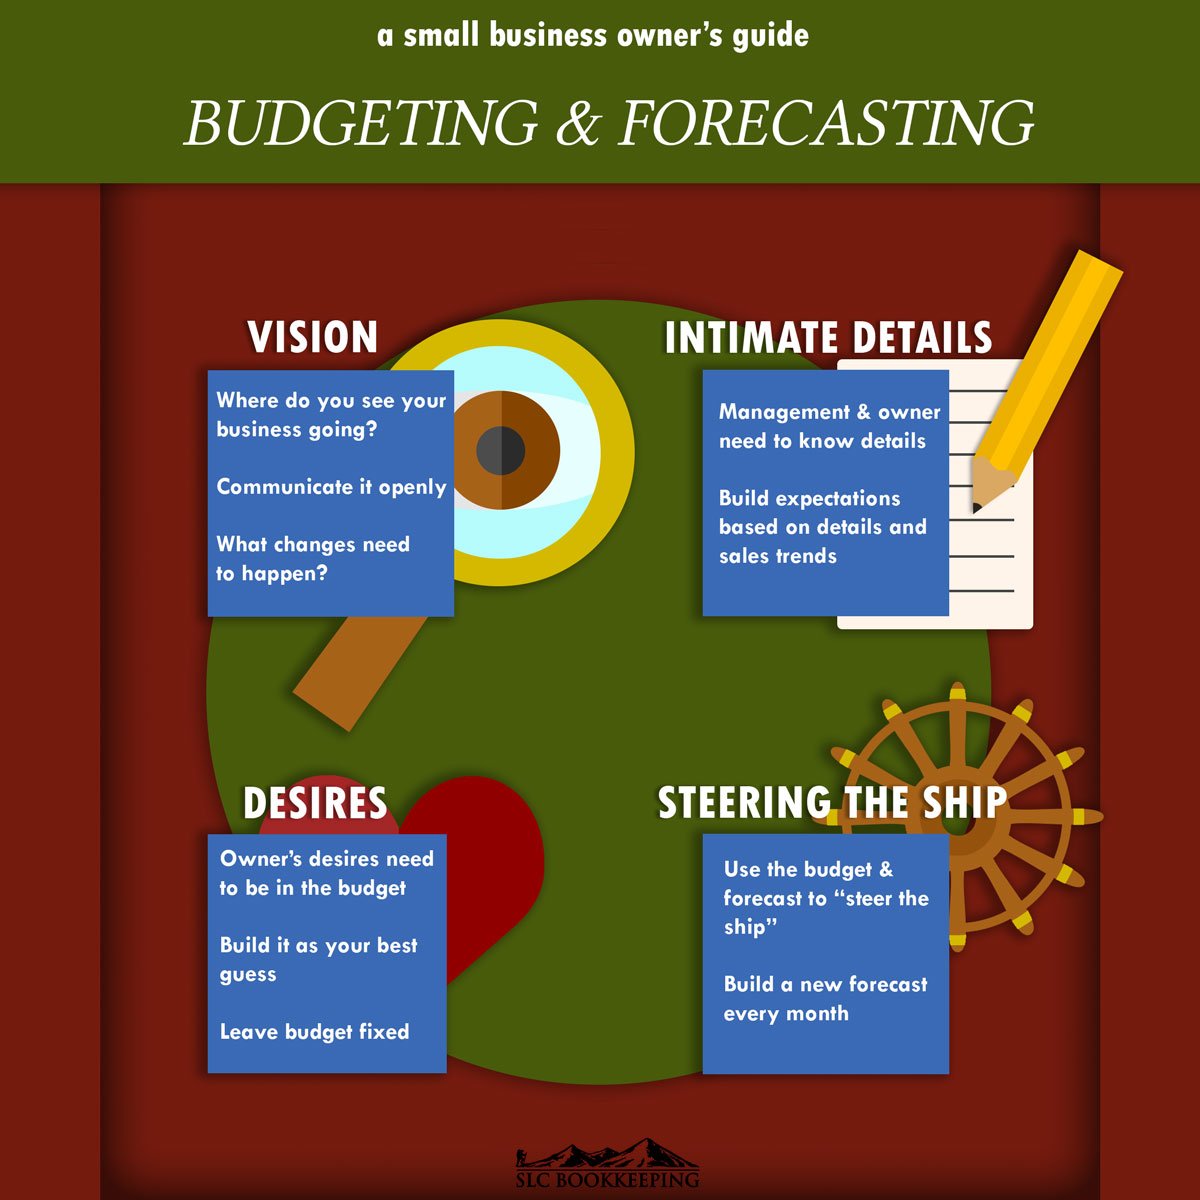 [Infographic] How to be an Integral Part of Budgeting and Forecasting